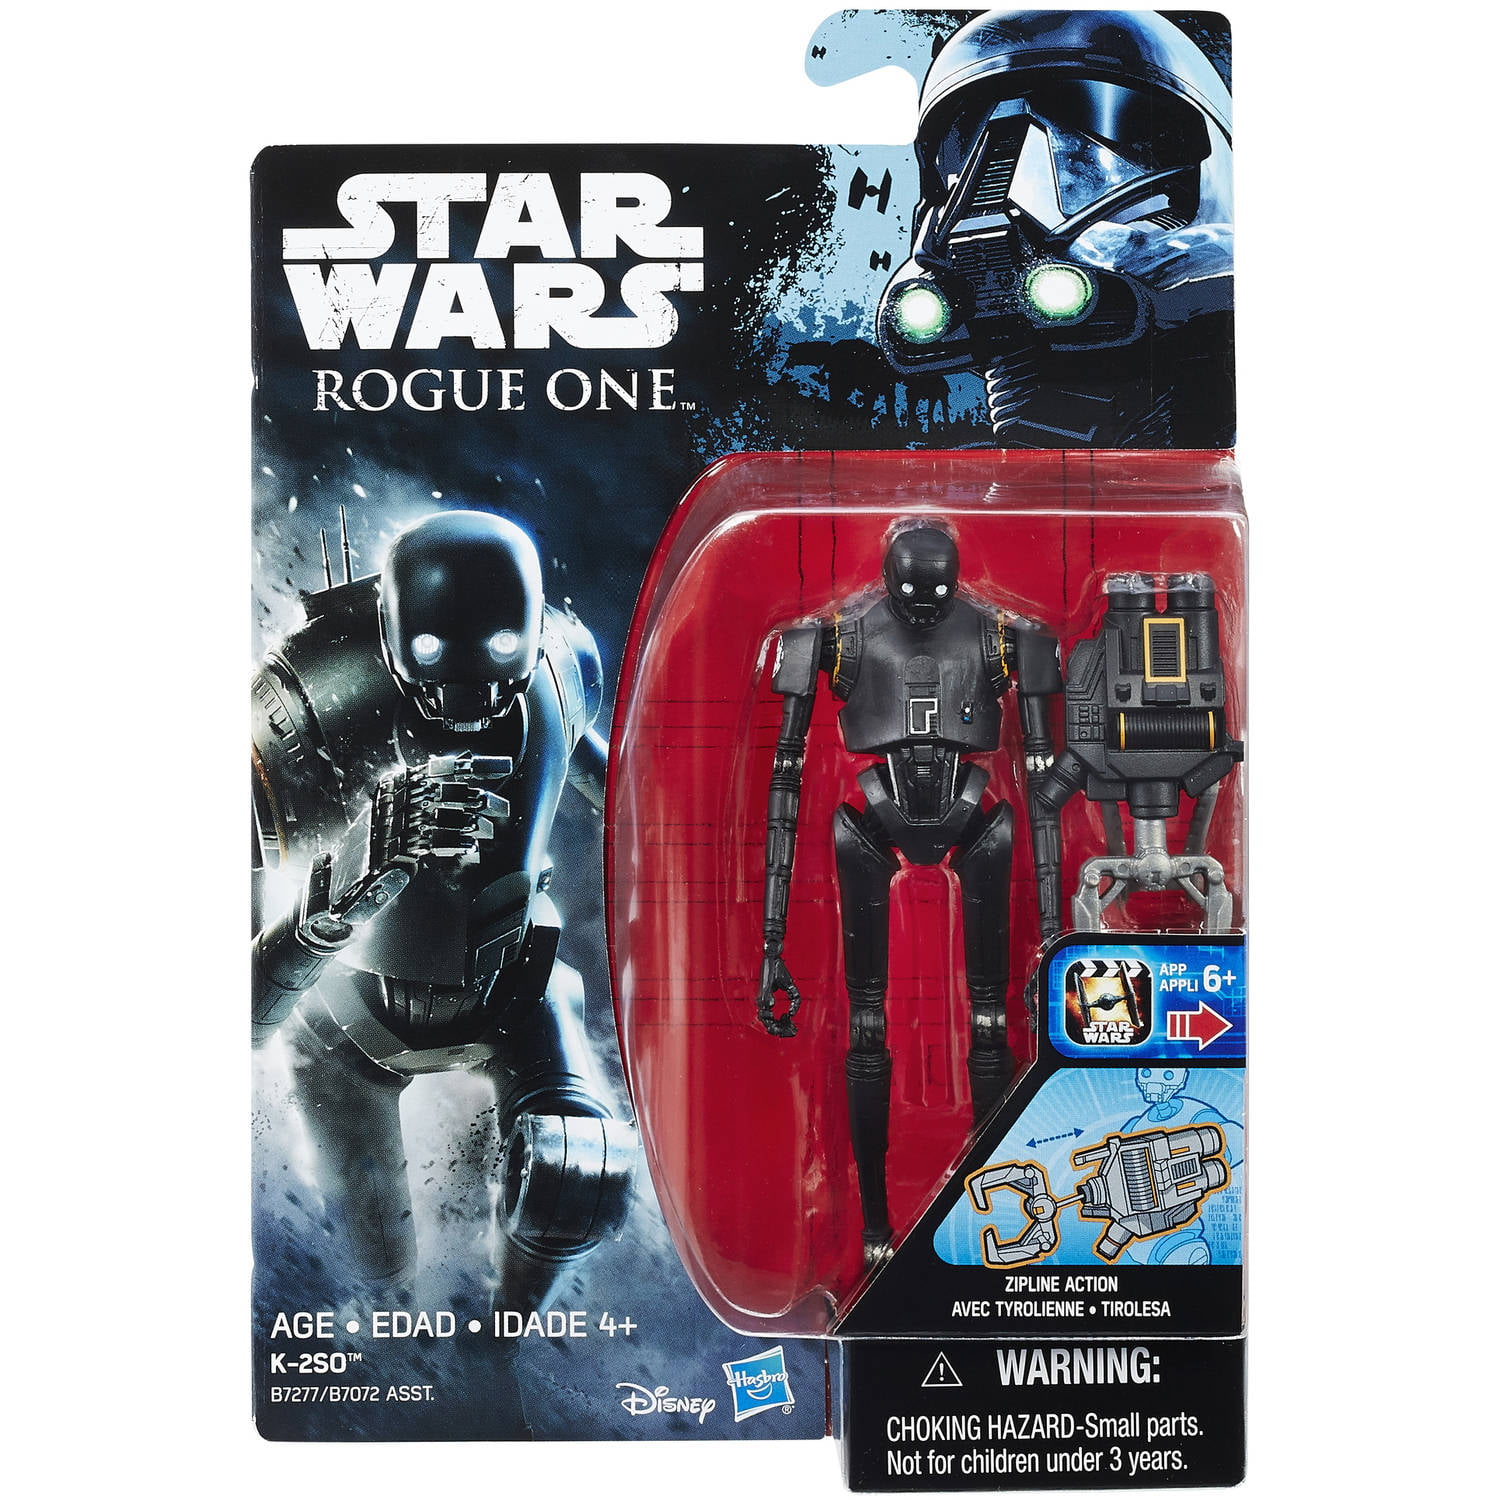 Star Wars Rogue One Darth Vader 3.75 Inch FREE SHIPPING NEW 9.5 cm